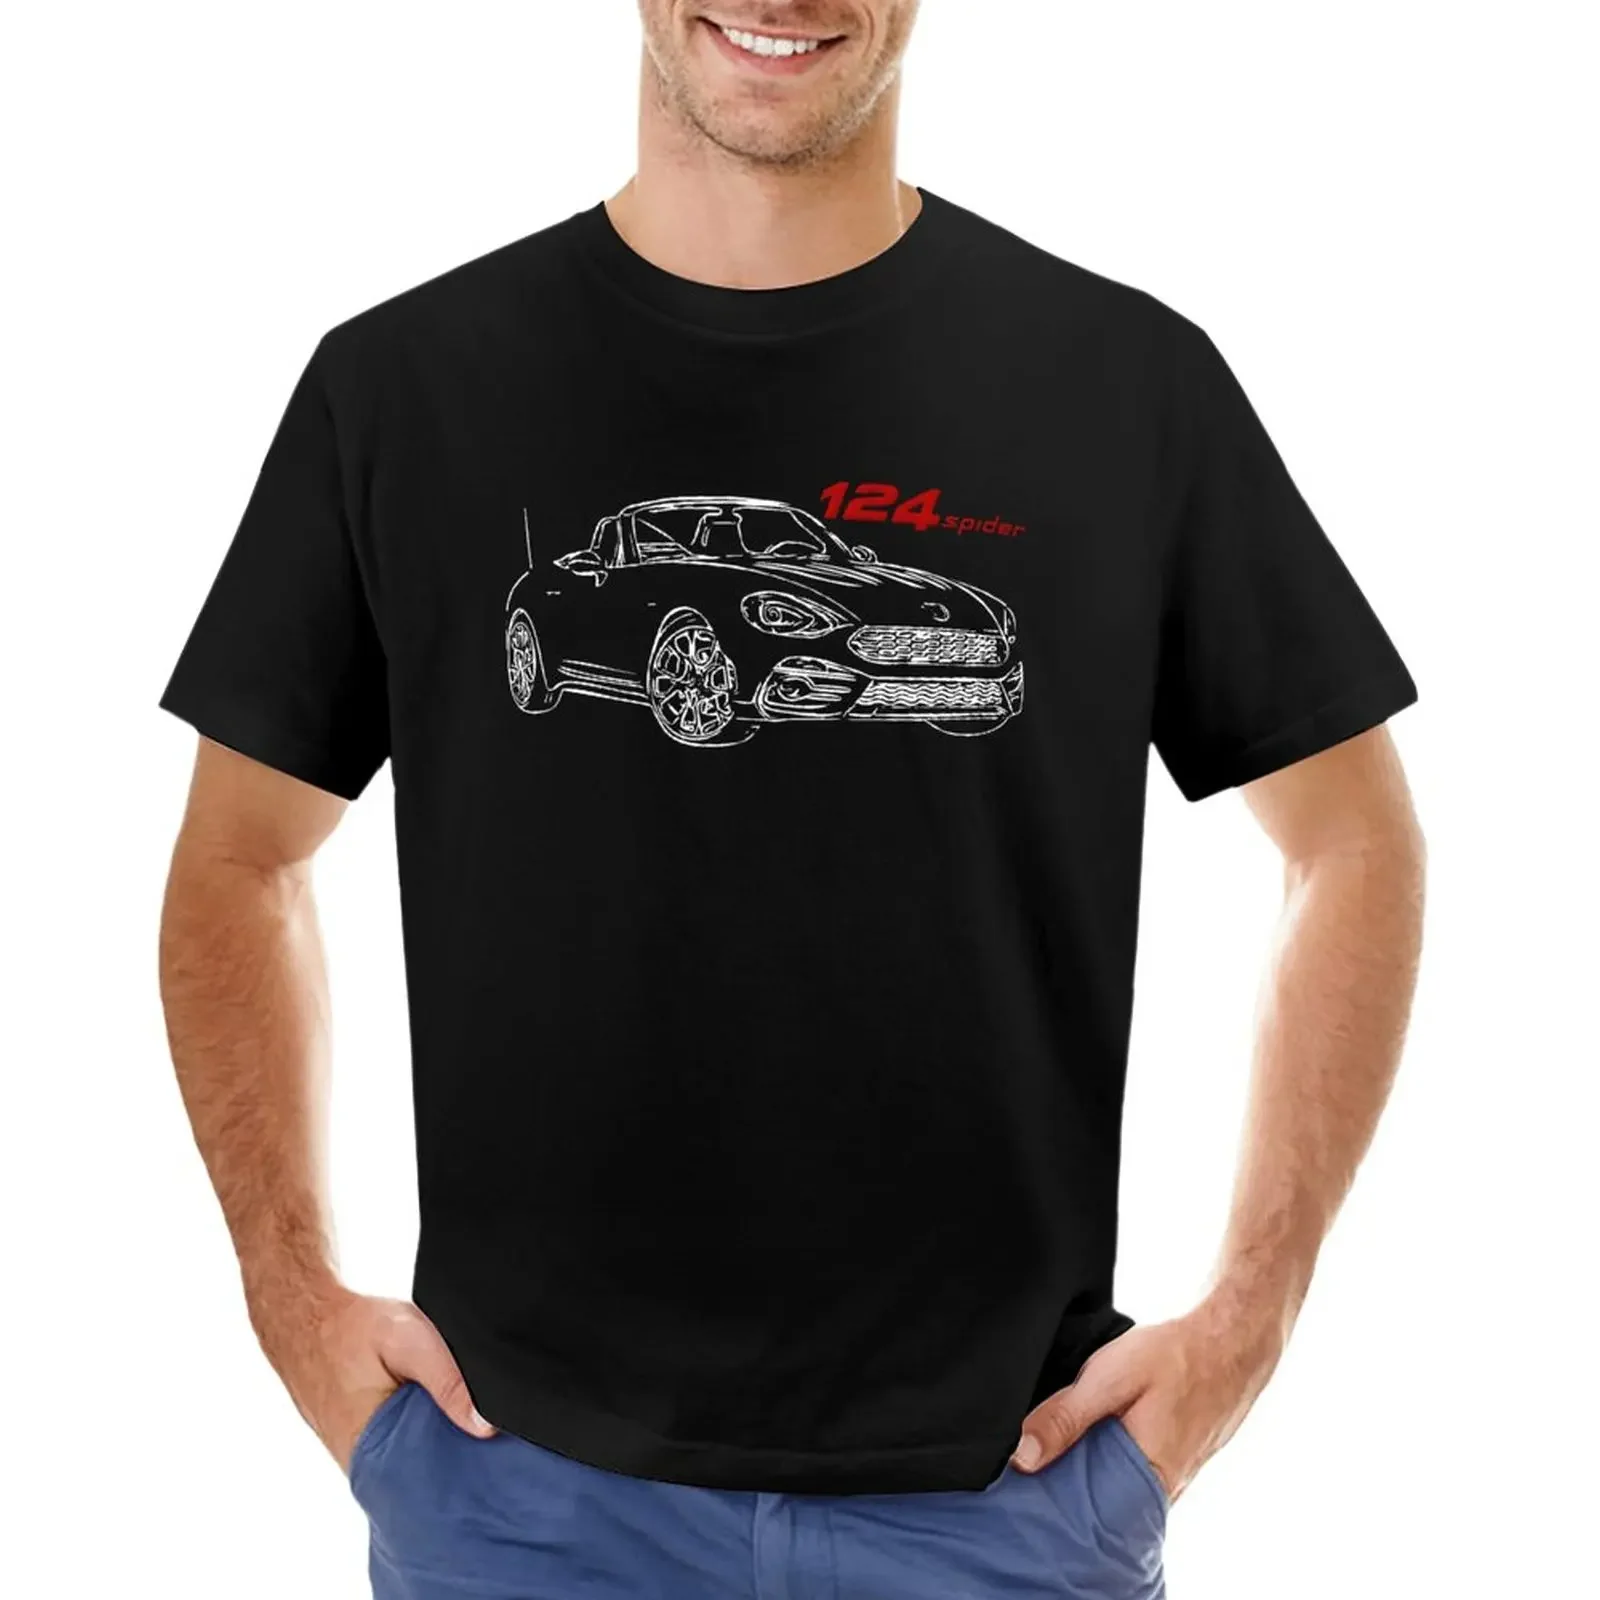 

Fiat 124 Spider T-Shirt quick-drying plus size tops mens t shirt graphic